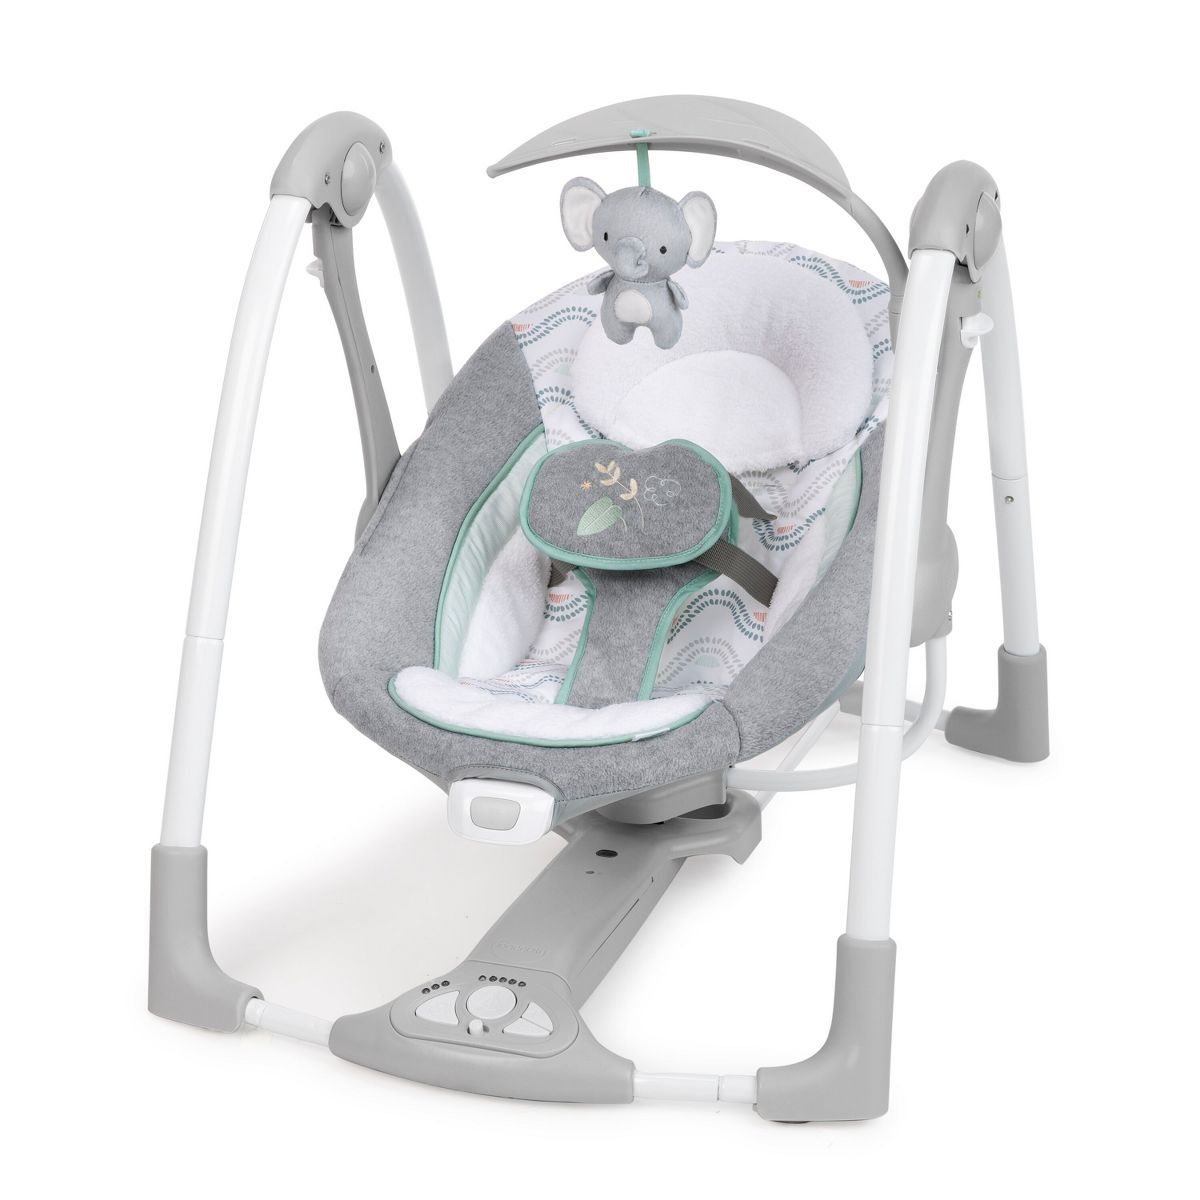 Ingenuity ConvertMe 2-in-1 Compact Portable Baby Swing 2 Infant Seat - Swell | Target